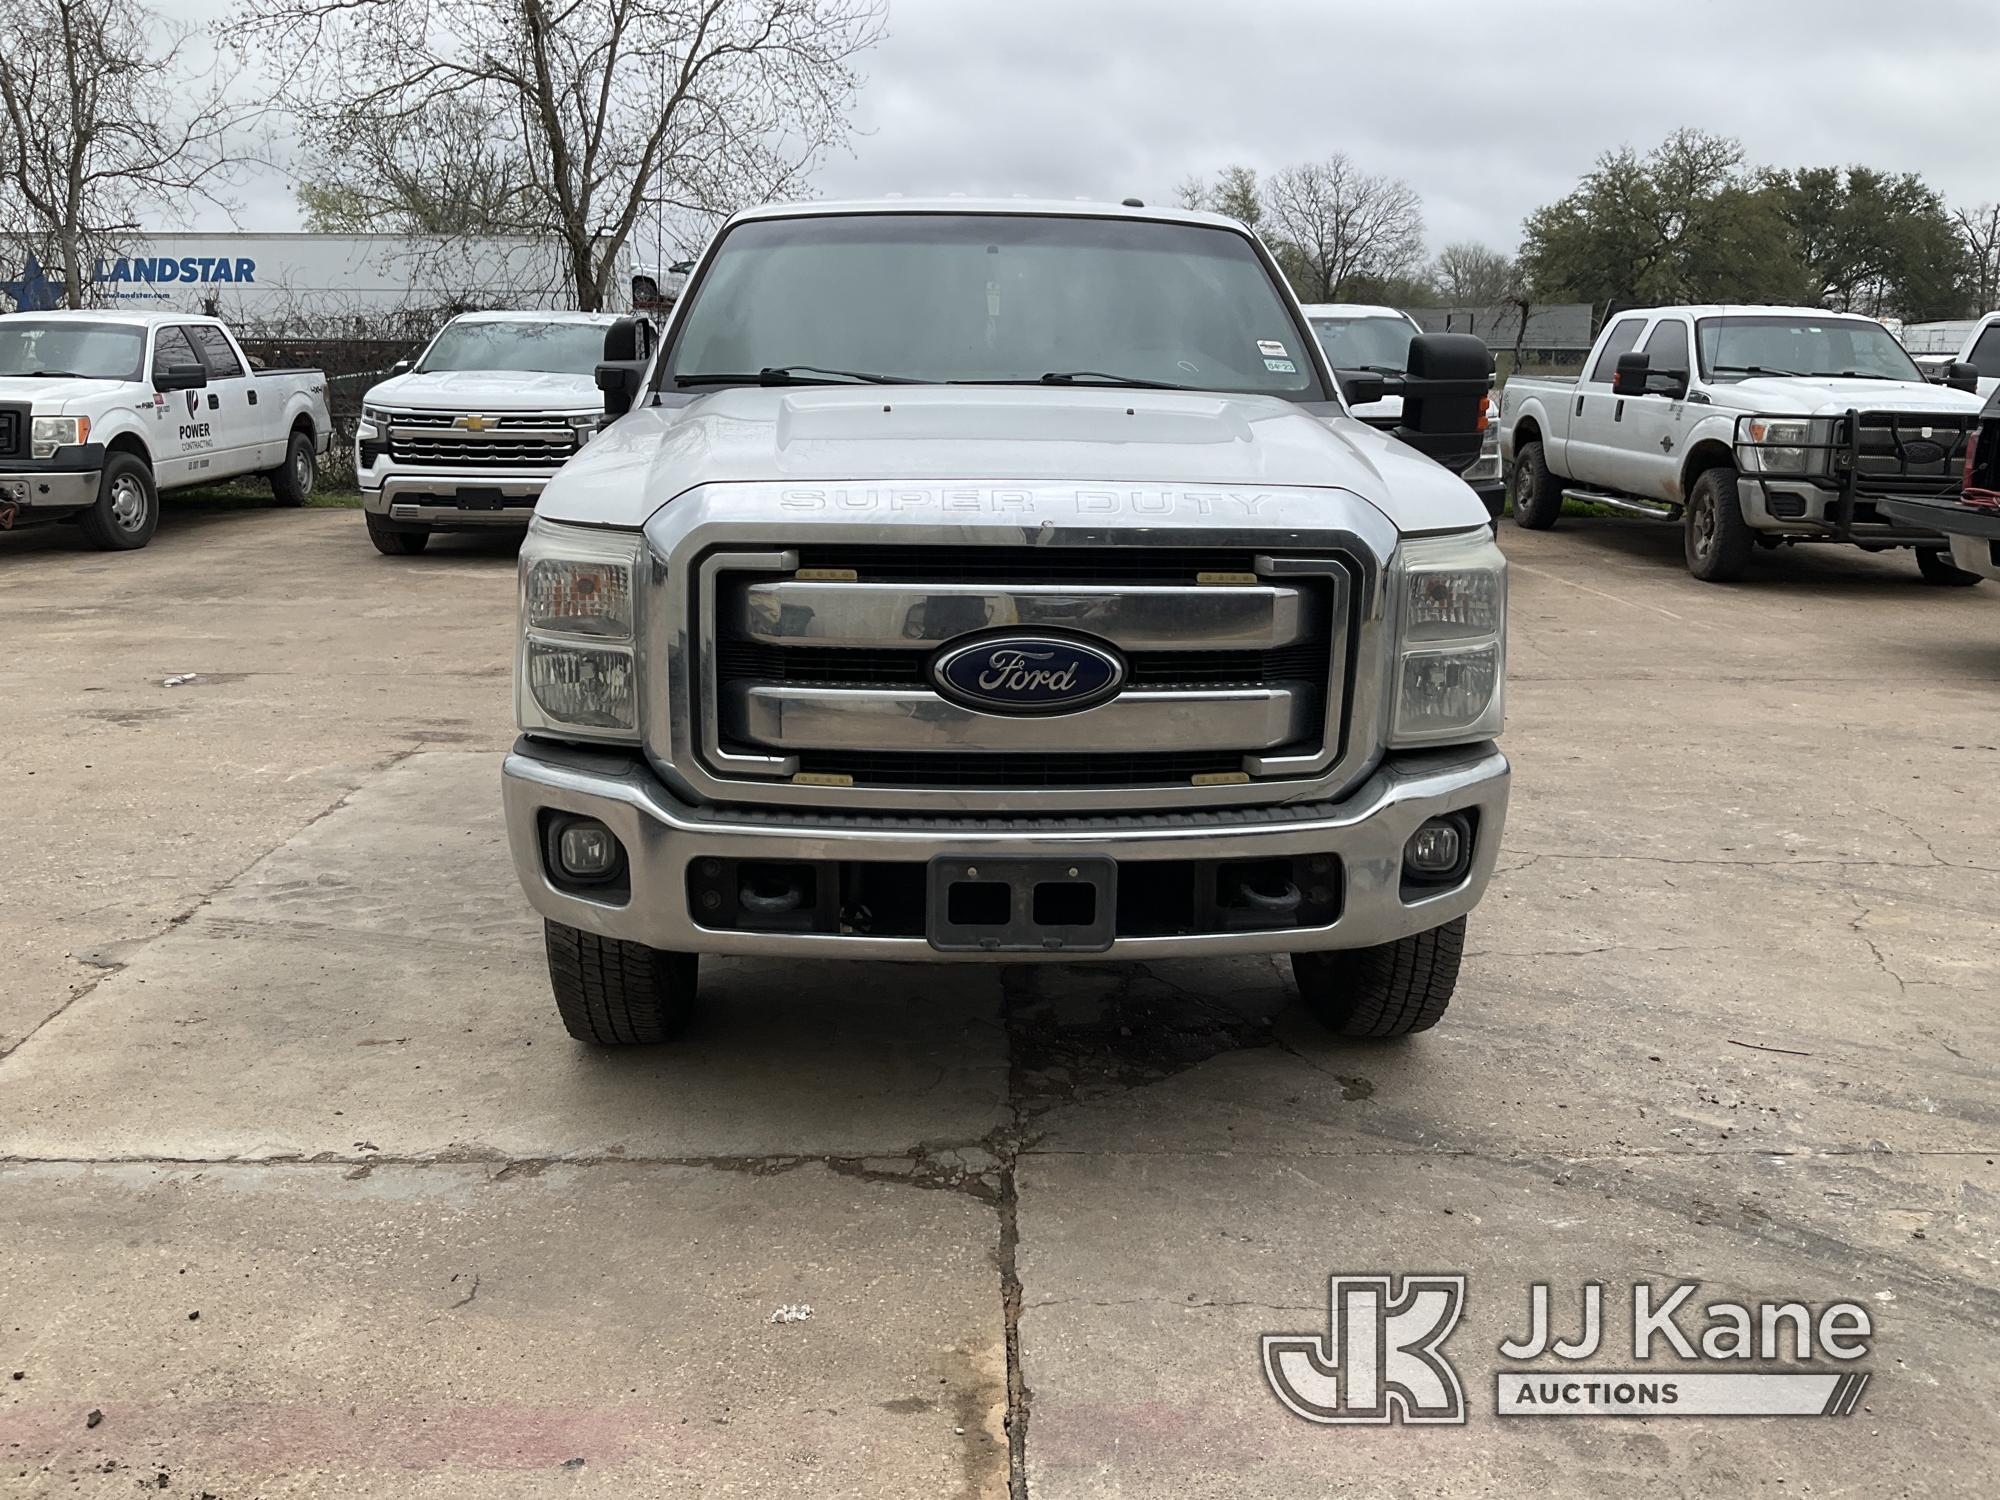 (Alvin, TX) 2016 Ford F250 4x4 Crew-Cab Pickup Truck Jump to start, check engine light active,batter